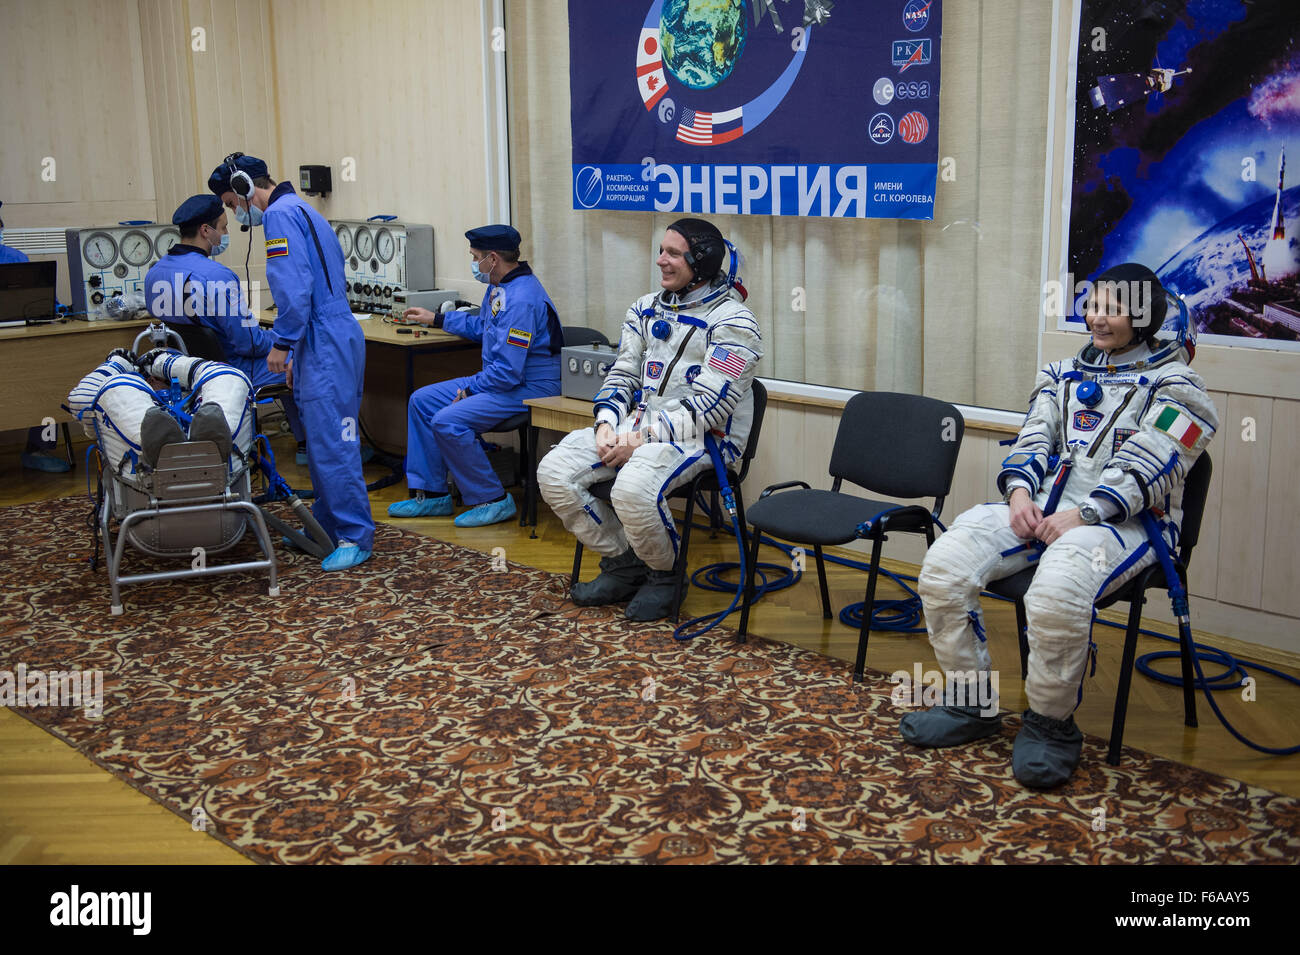 Expedition 42 Flight Engineers Terry Virts of NASA and Samantha Cristoforetti of the European Space Agency (ESA) wait while crewmate and Soyuz Commander, Anton Shkaplerov of the Russian Federal Space Agency (Roscosmos), has his Sokol suit pressure checked on Sunday, Nov. 23, 2014 at Building 254 in the Baikonur Cosmodrome in Baikonur, Kazakhstan. Launch of the Soyuz rocket is scheduled for the early hours of Nov. 24 and will carry Shkaplerov, Virts, and Cristoforetti into orbit to begin their five and a half month mission on the International Space Station. Photo Credit: (NASA/Aubrey Gemignani Stock Photo